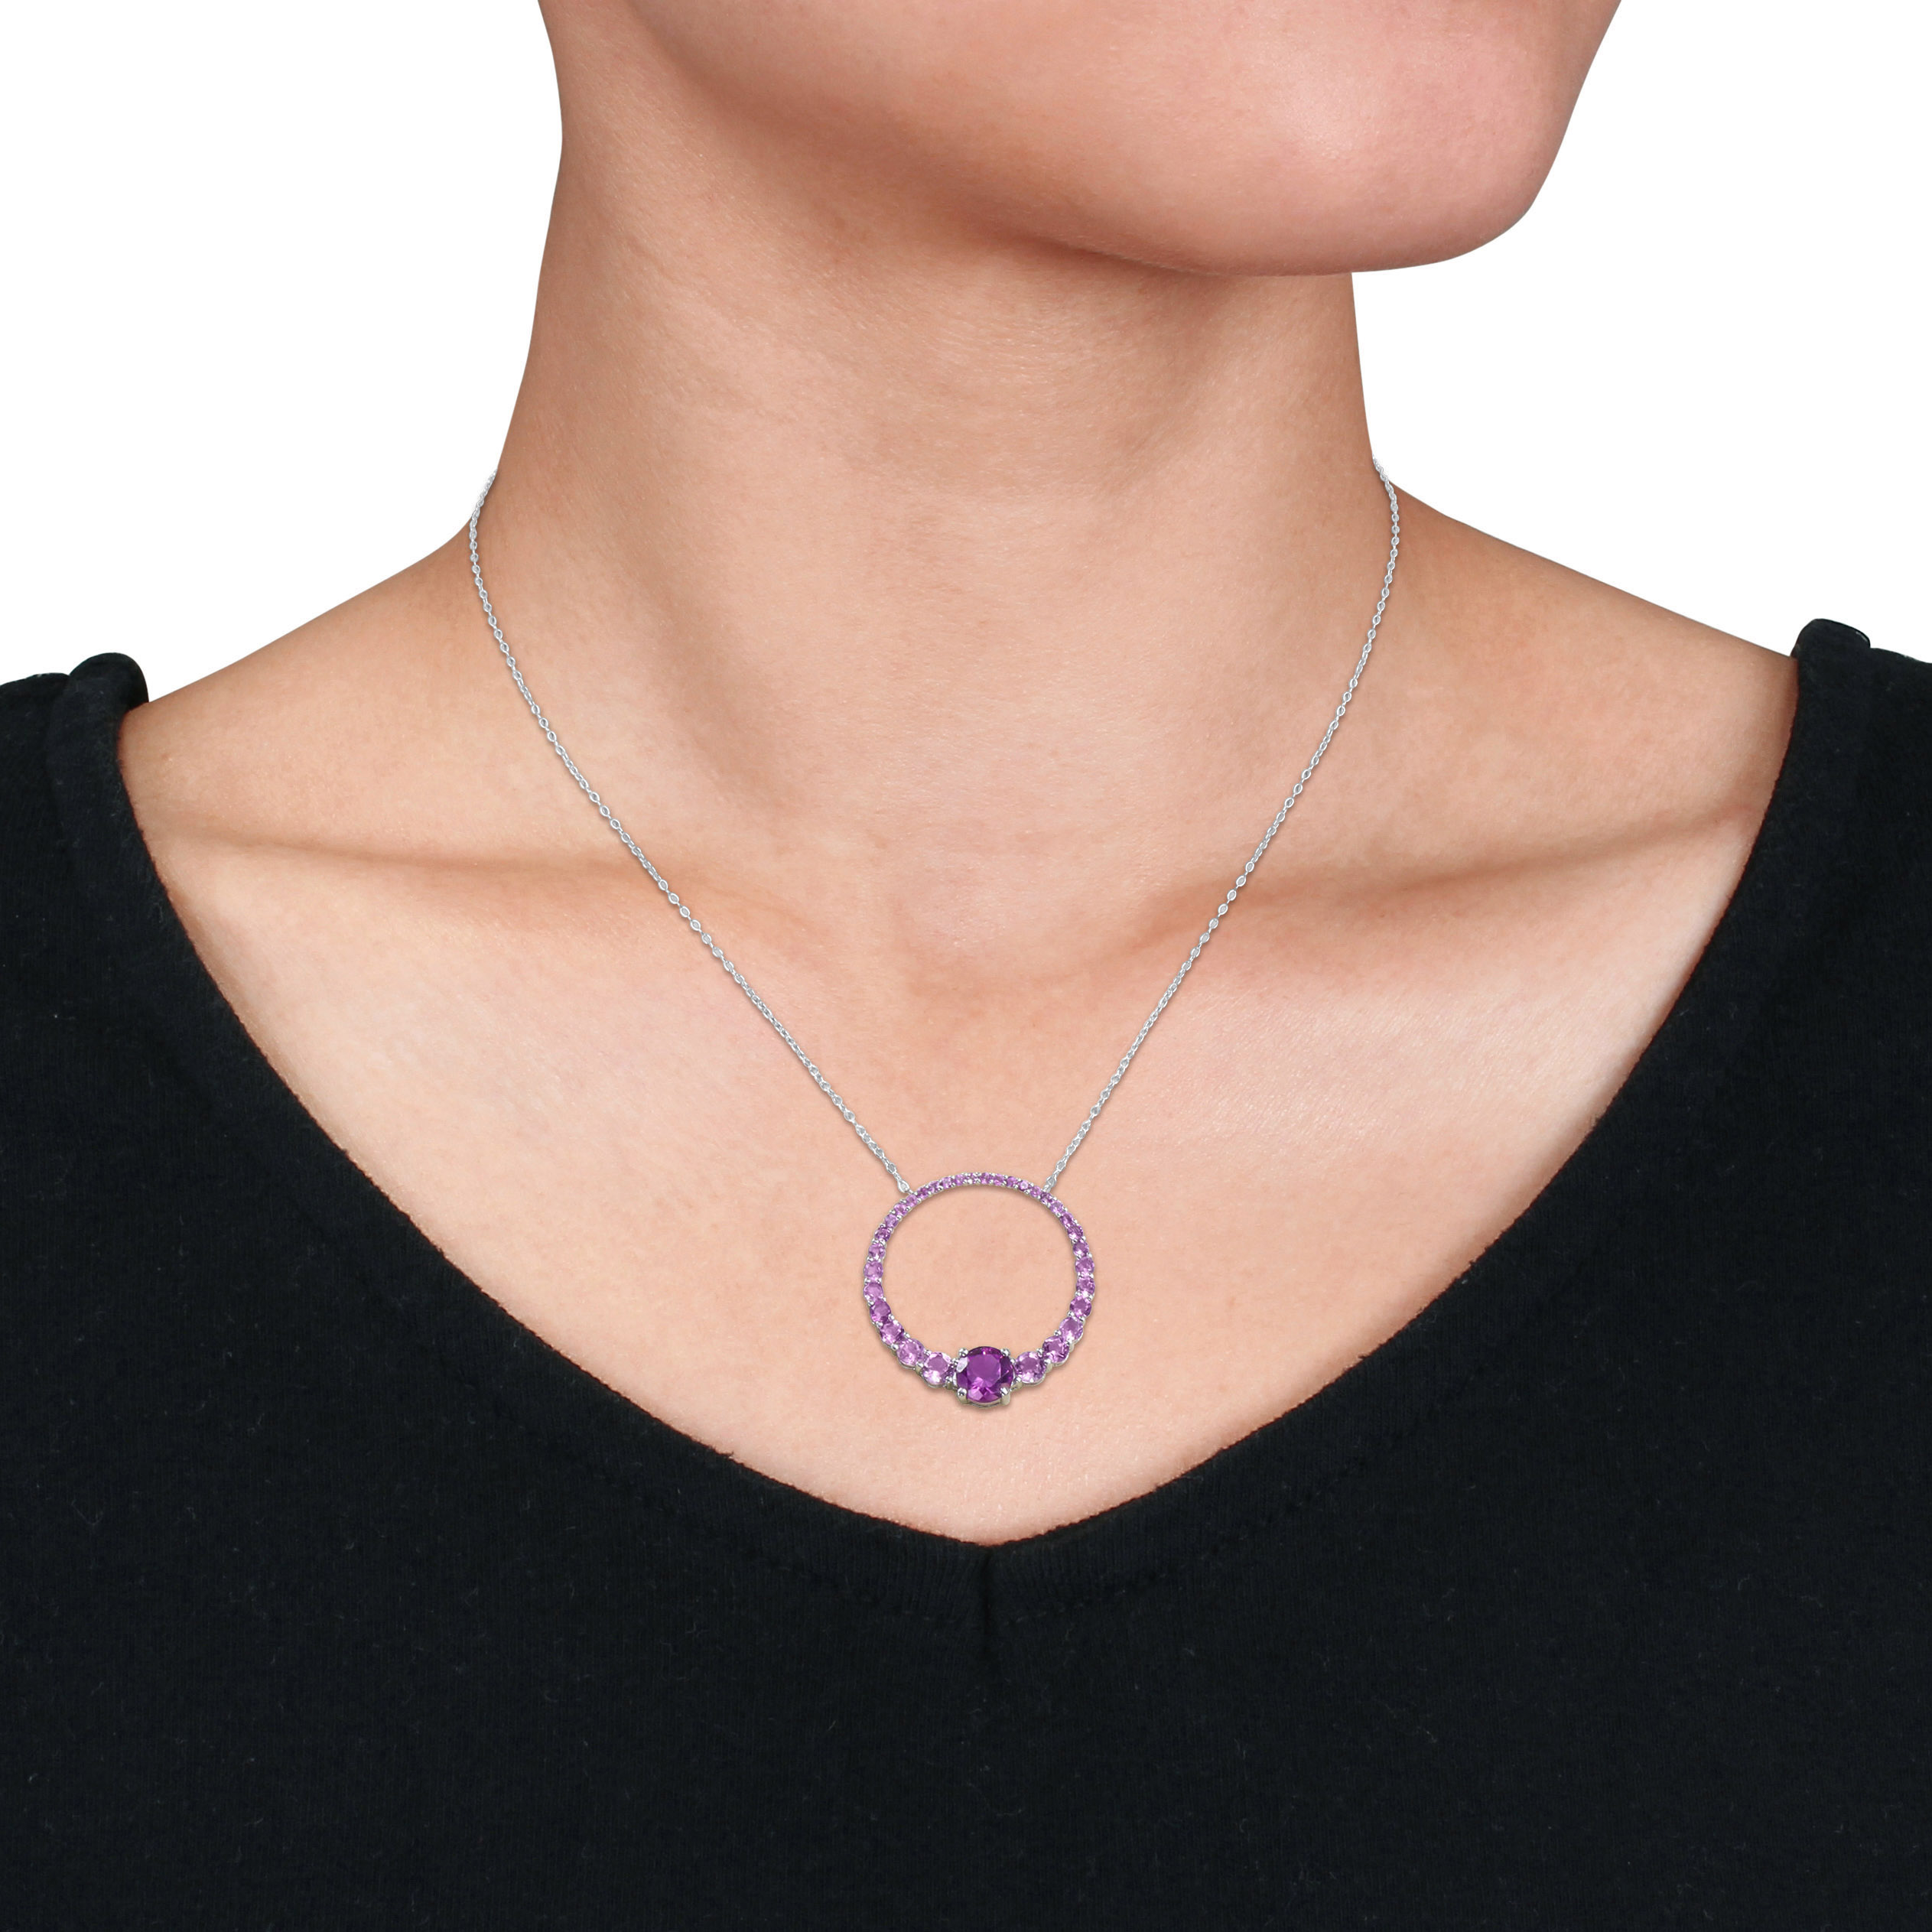 3 CT TGW African Amethyst Circle of Life Pendant with Chain in Sterling Silver - 18 in